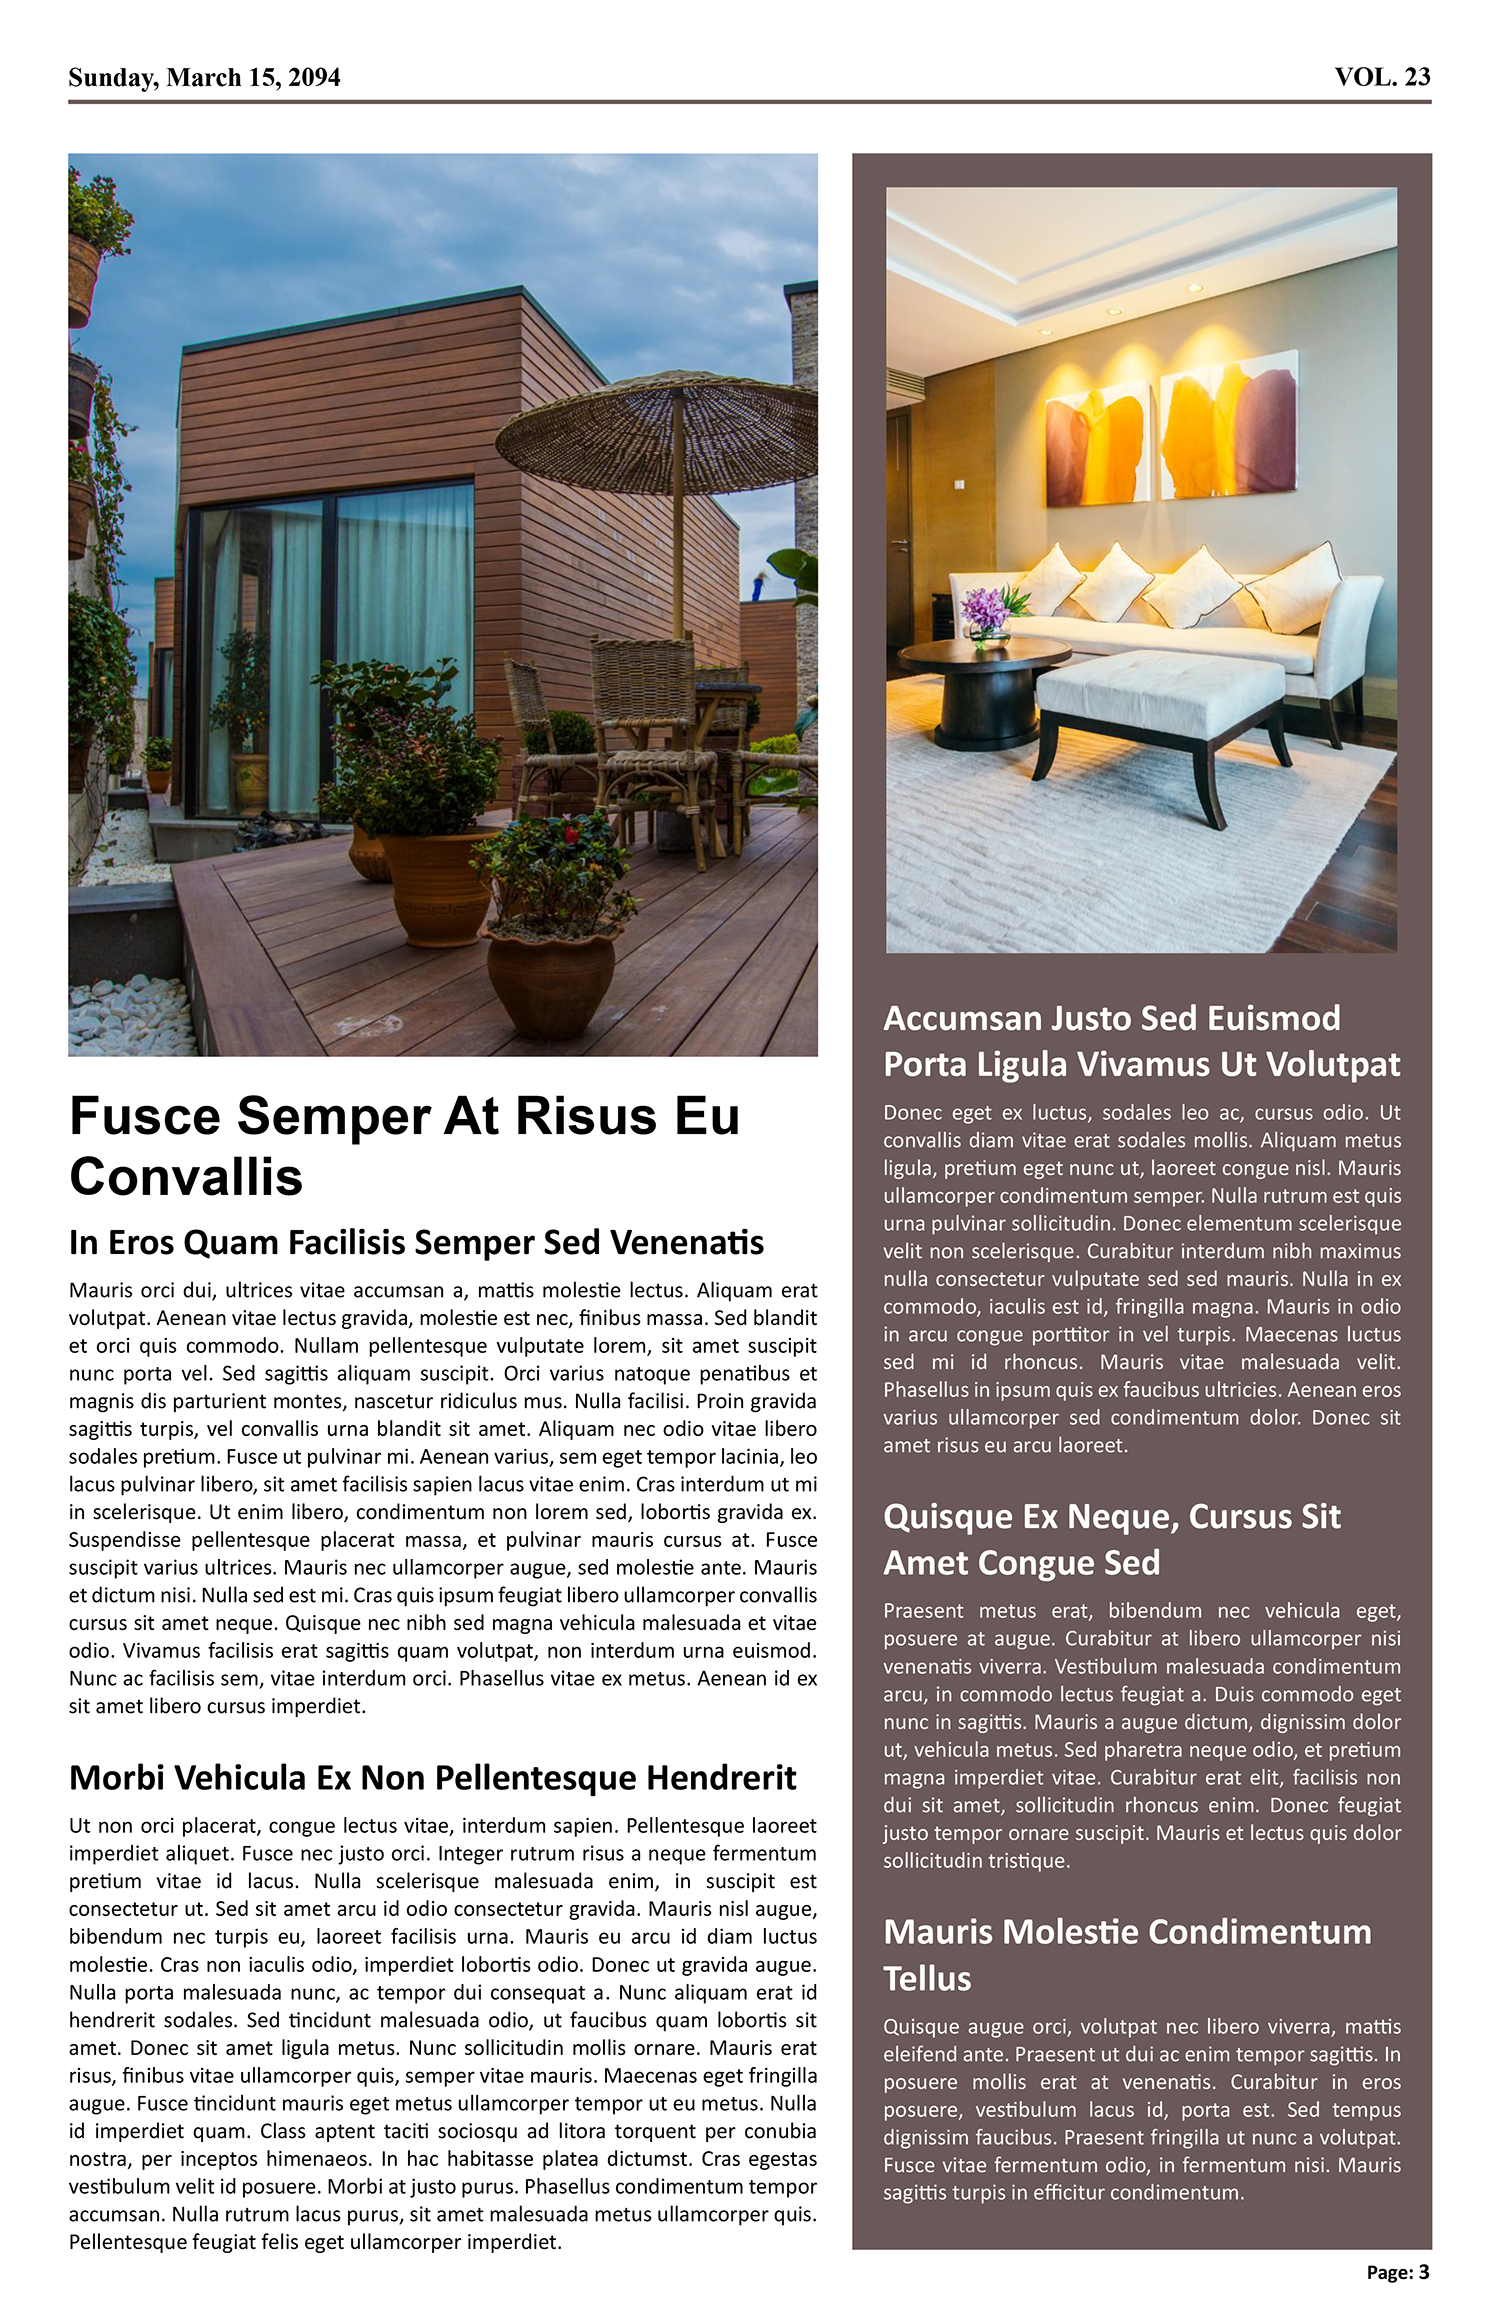 Real Estate Newspaper Article Template - Page 03